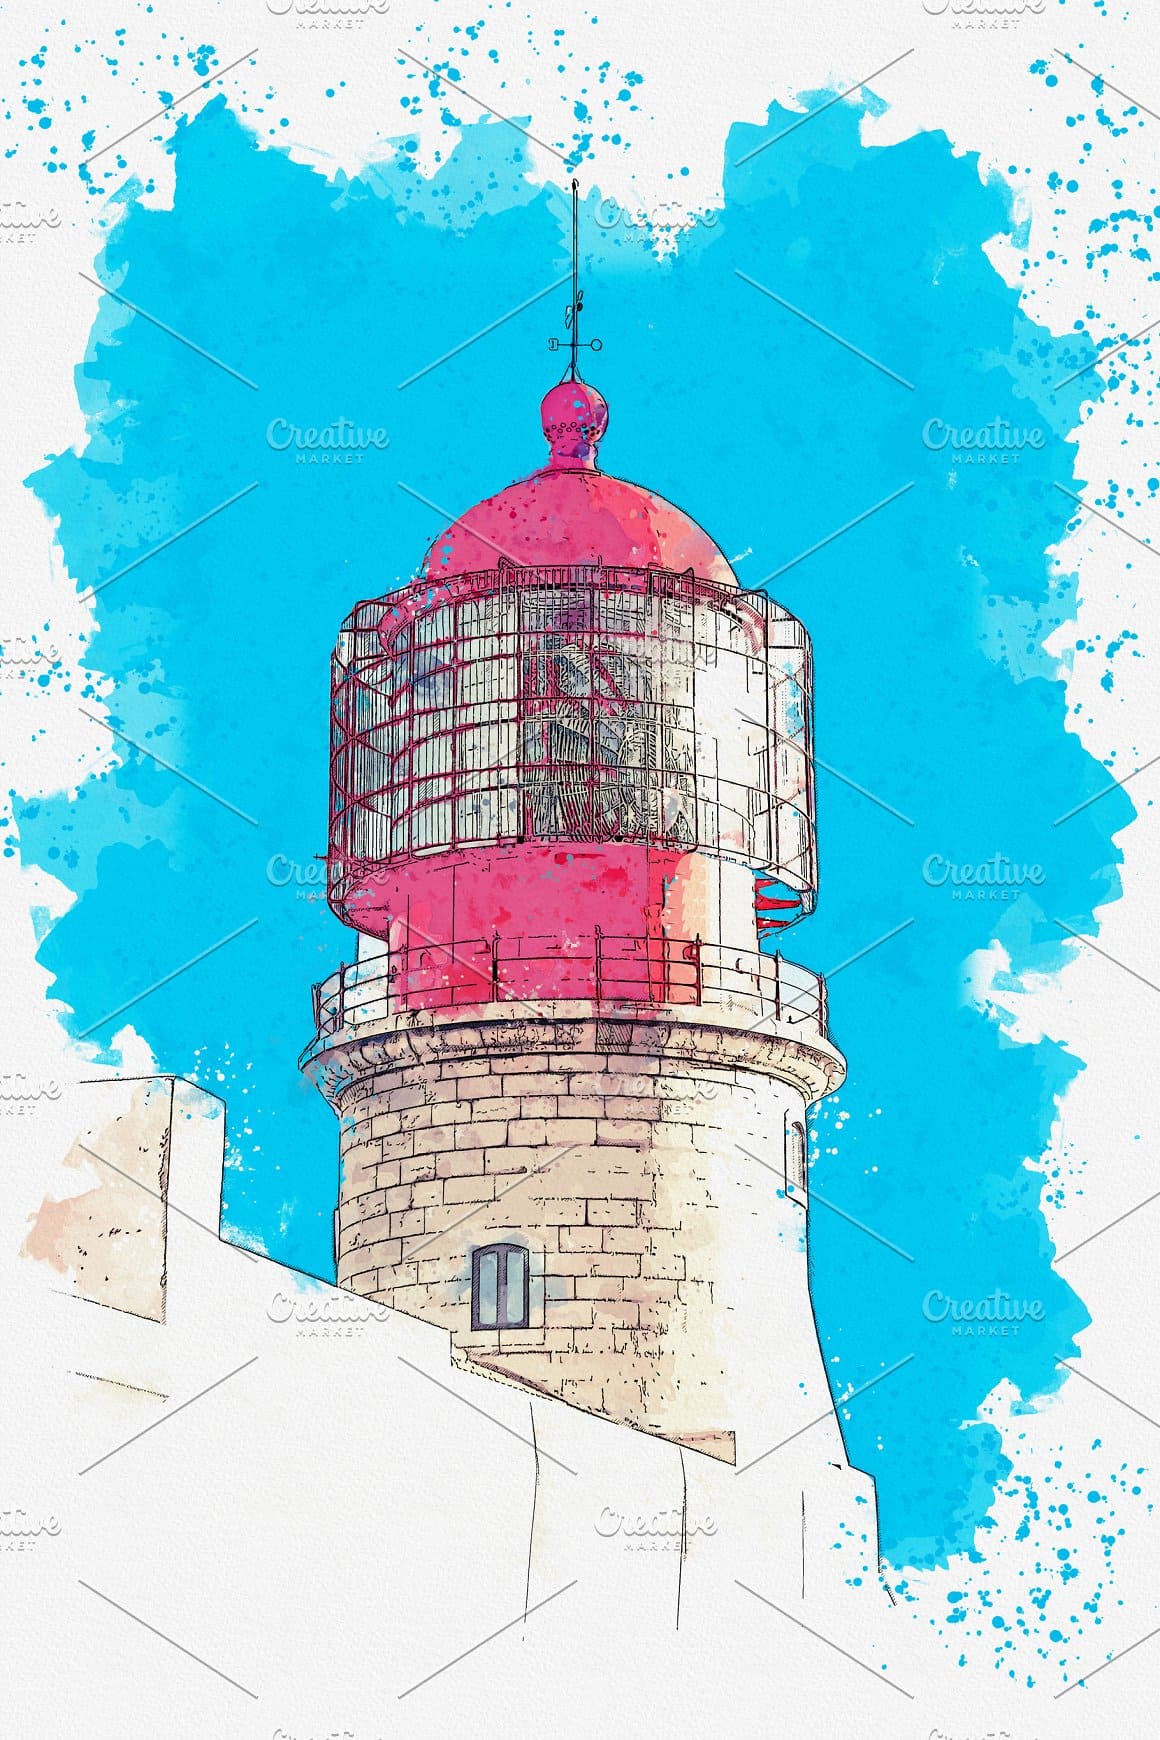 Watercolor drawing of a lighthouse with a red roof.